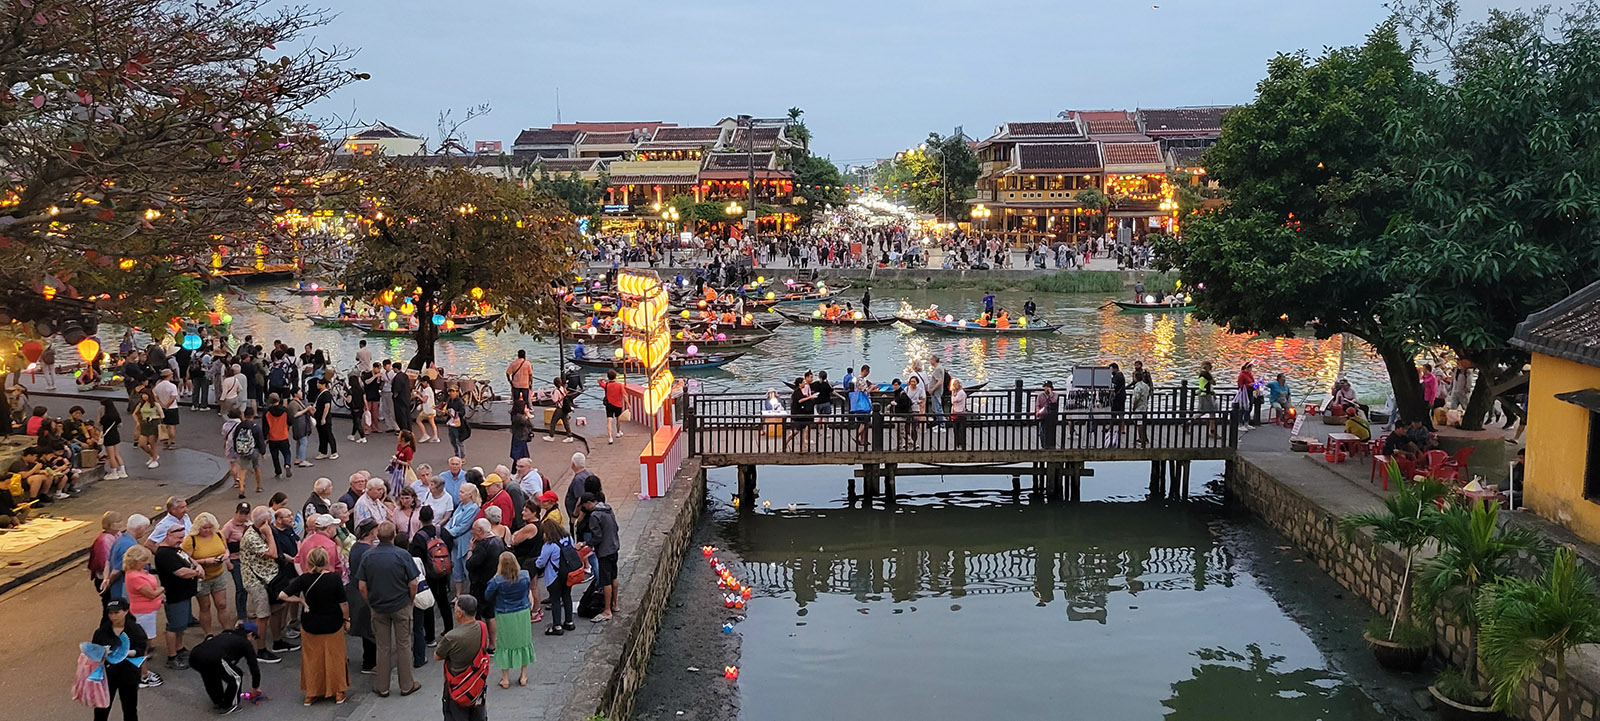 Crowds on a bridge and sidewalks along the canal in Hoi An, Vietnam as night approaches.